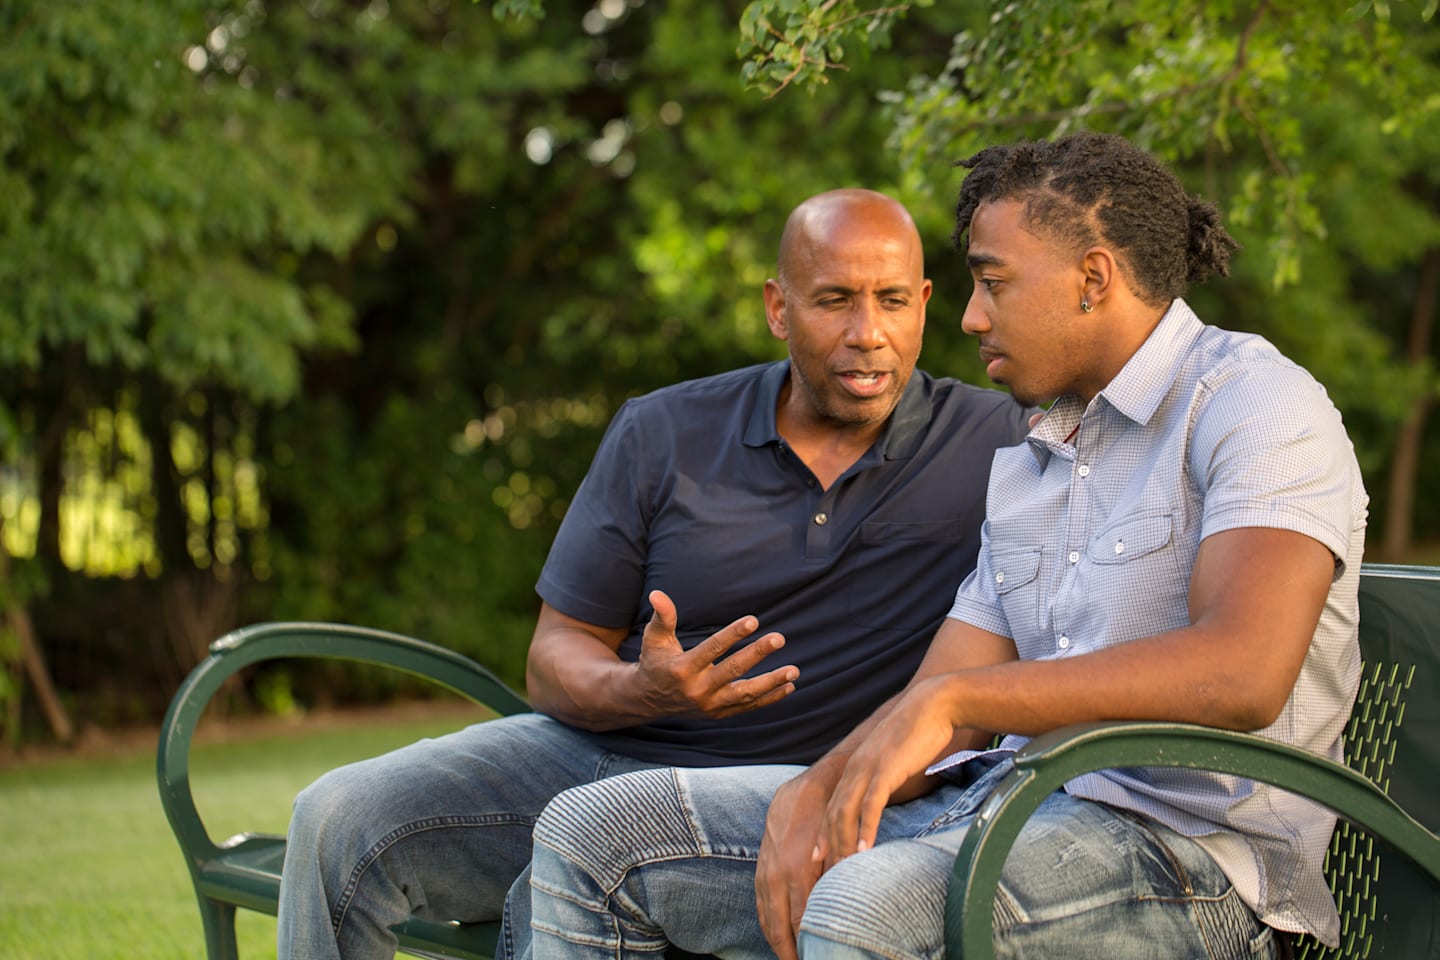 Father speaking with son on park bench. 